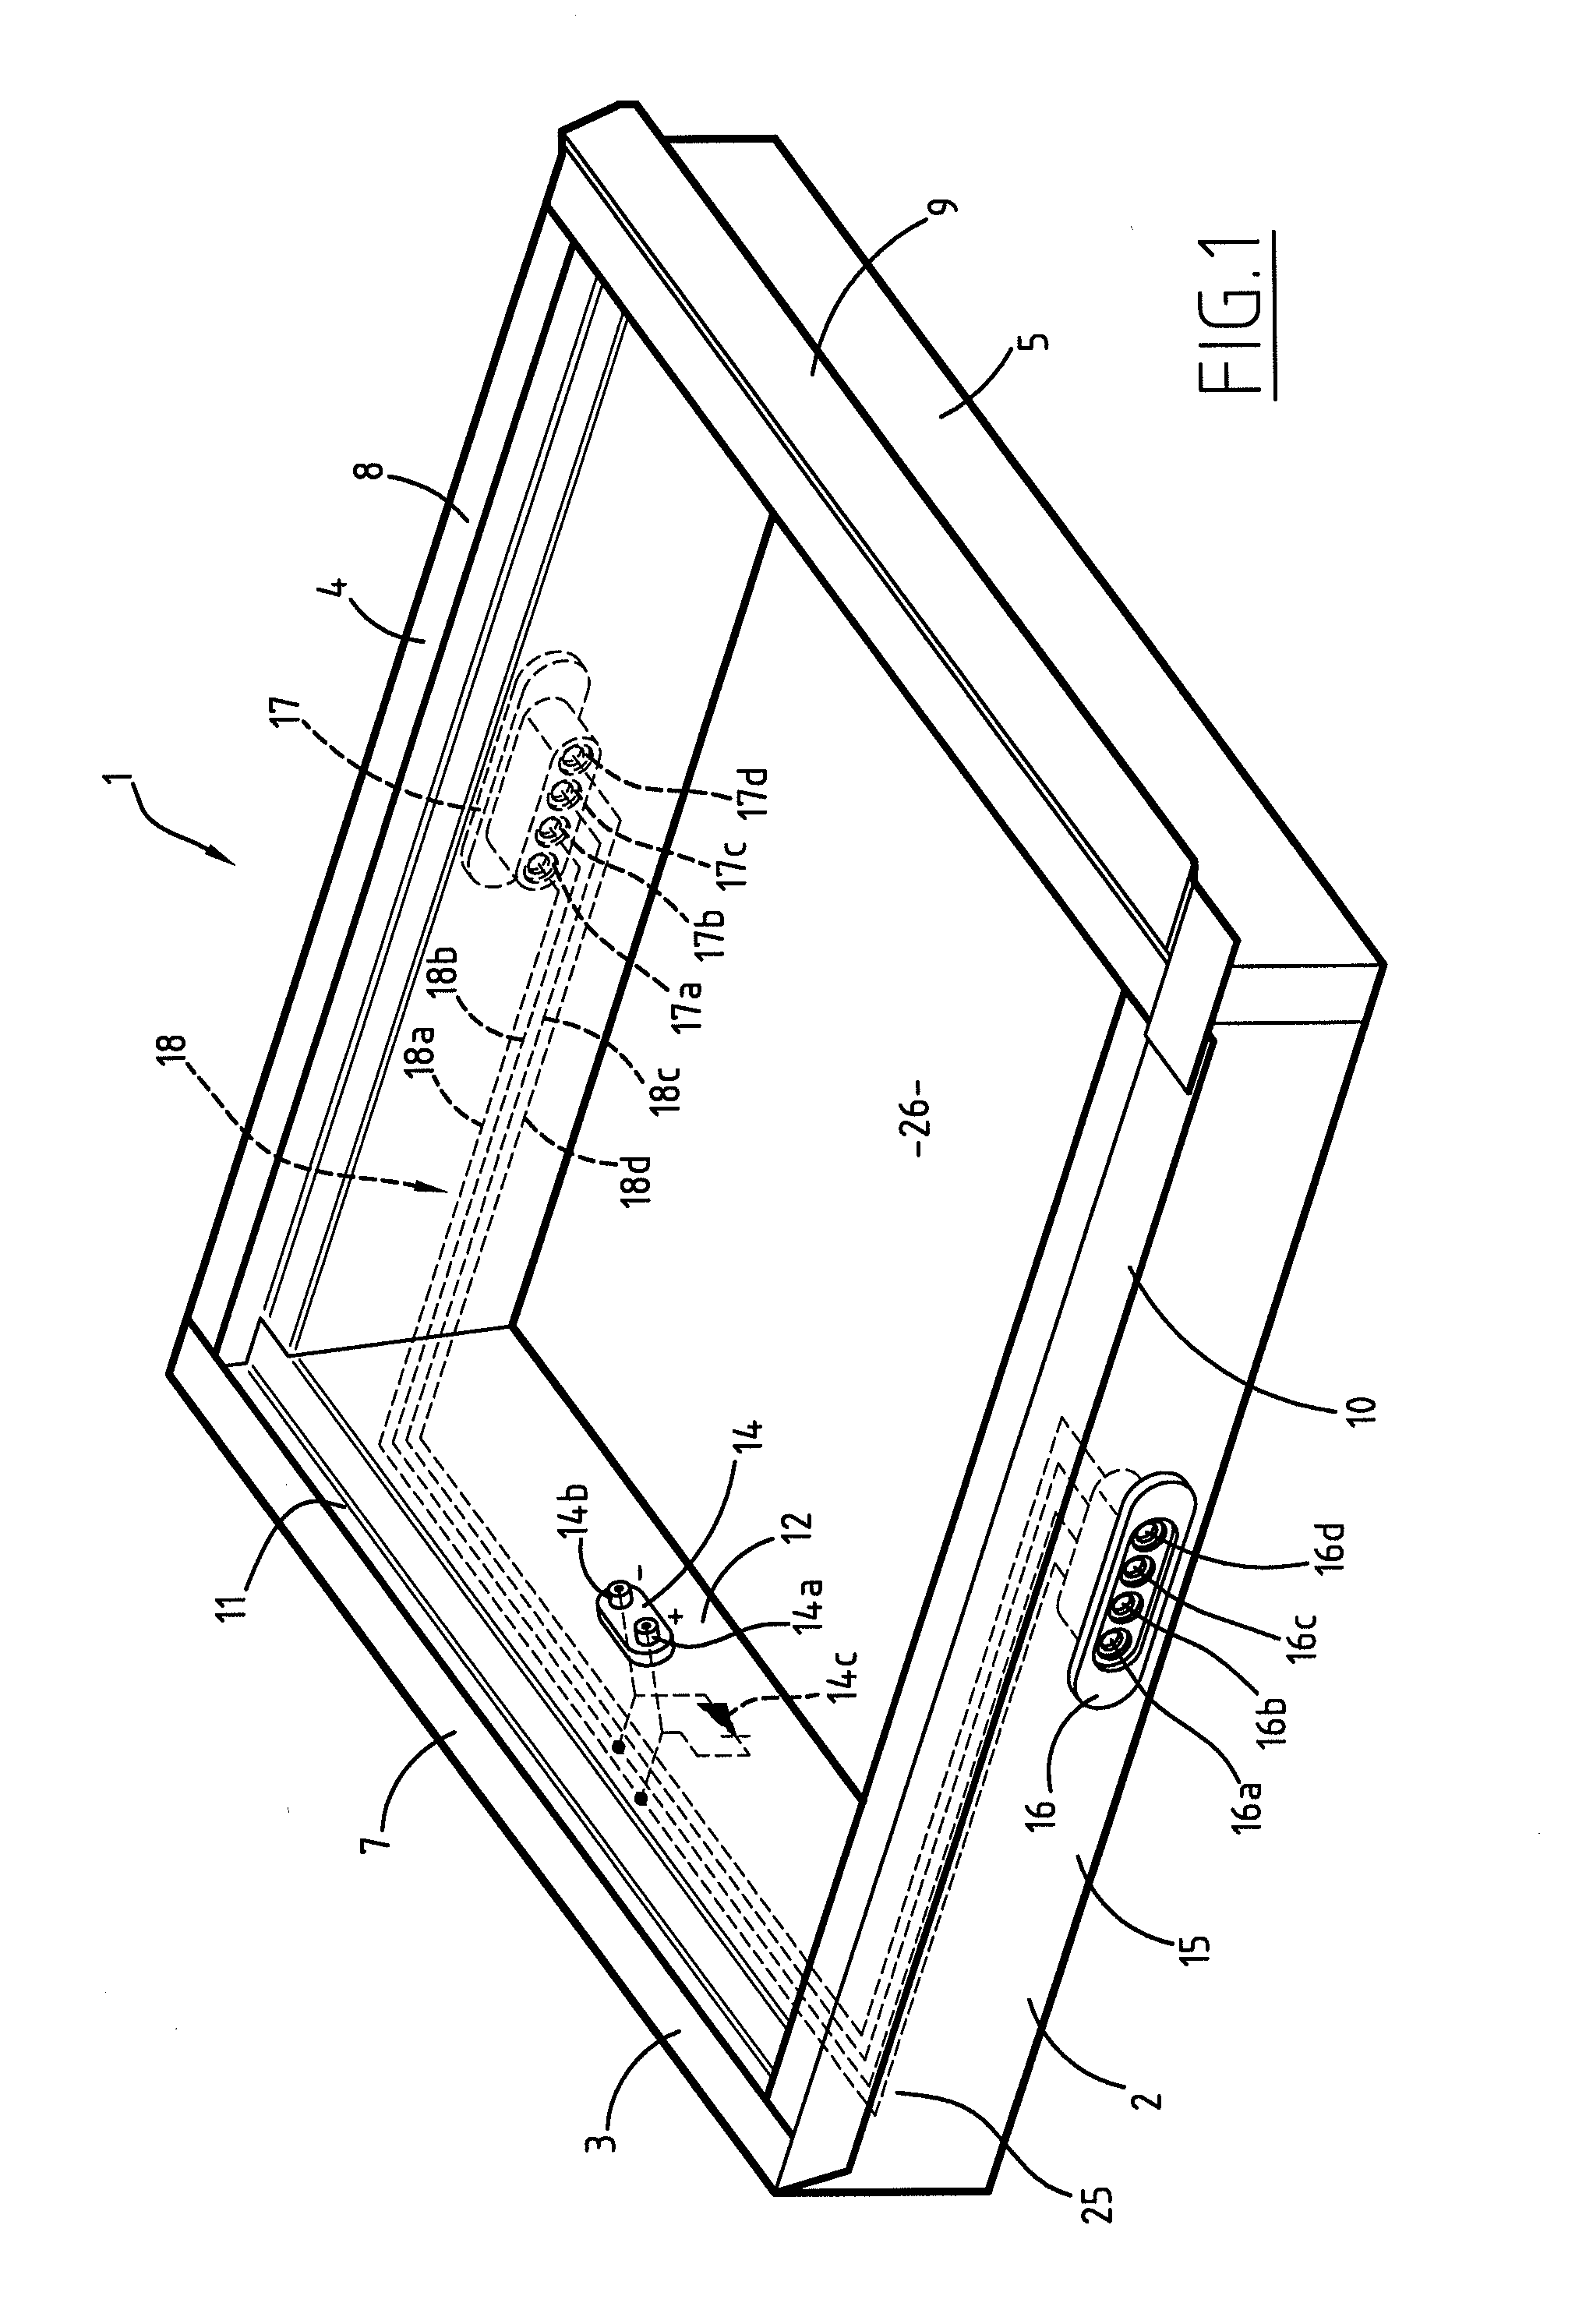 Bearing frame for an electrically active panel such as photovoltaic panel